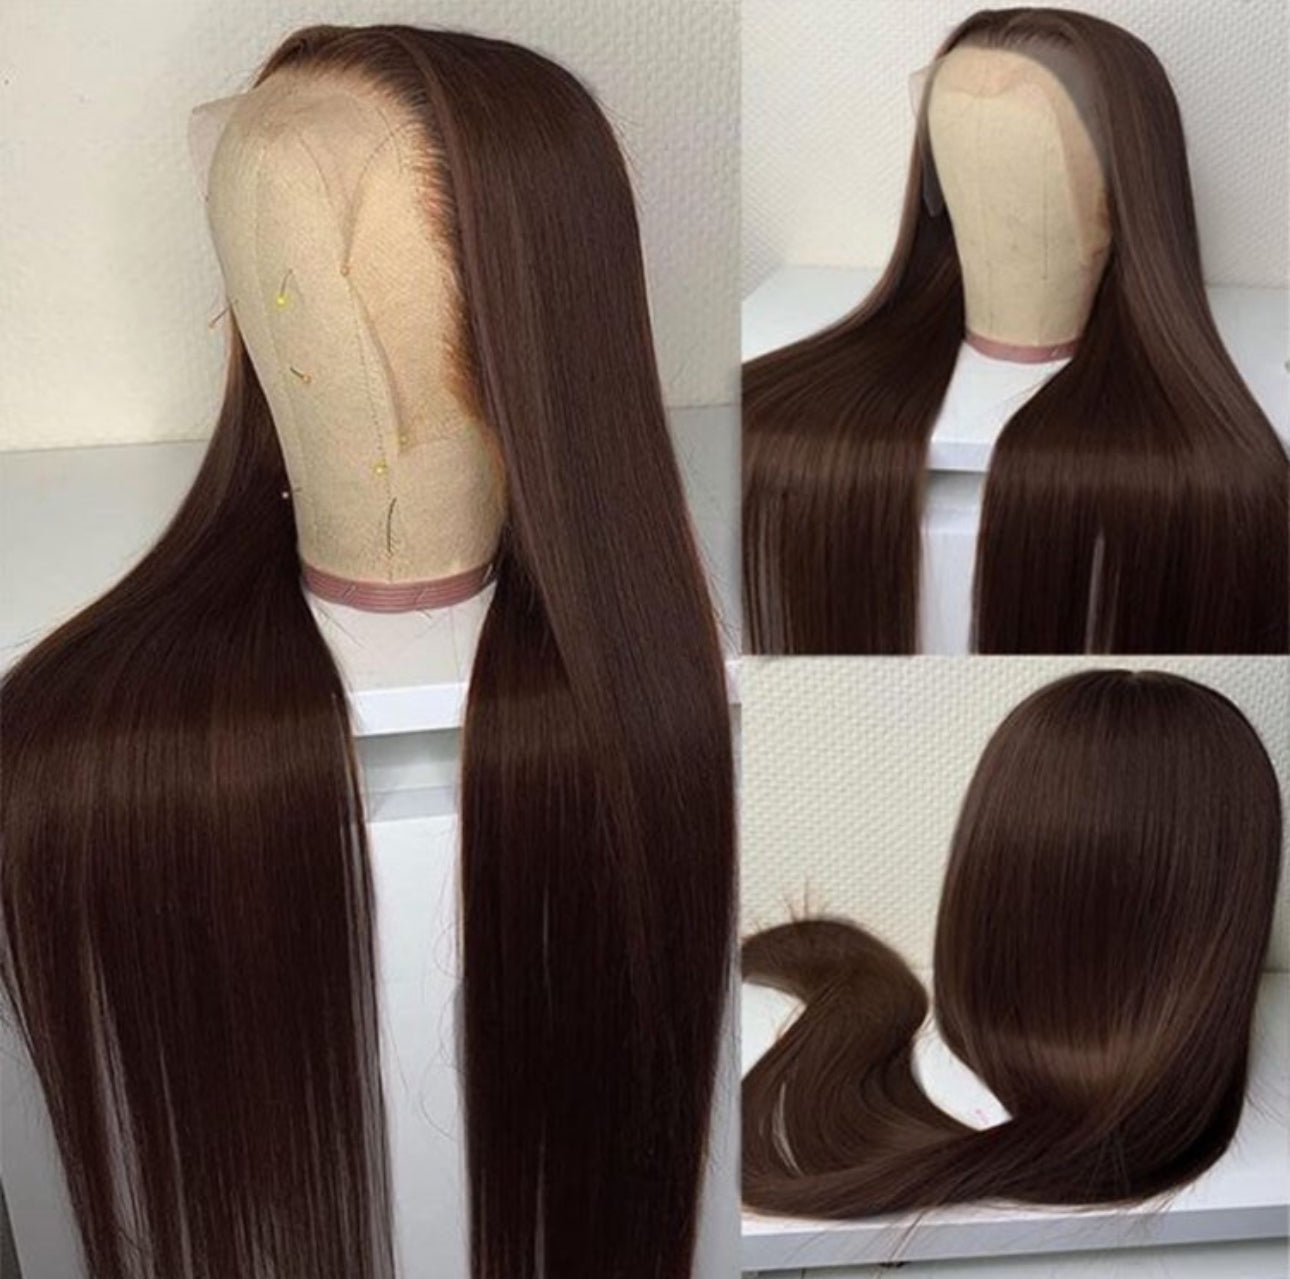 NEW 13x4 Straight “Hot Cocoa” Frontal Wig